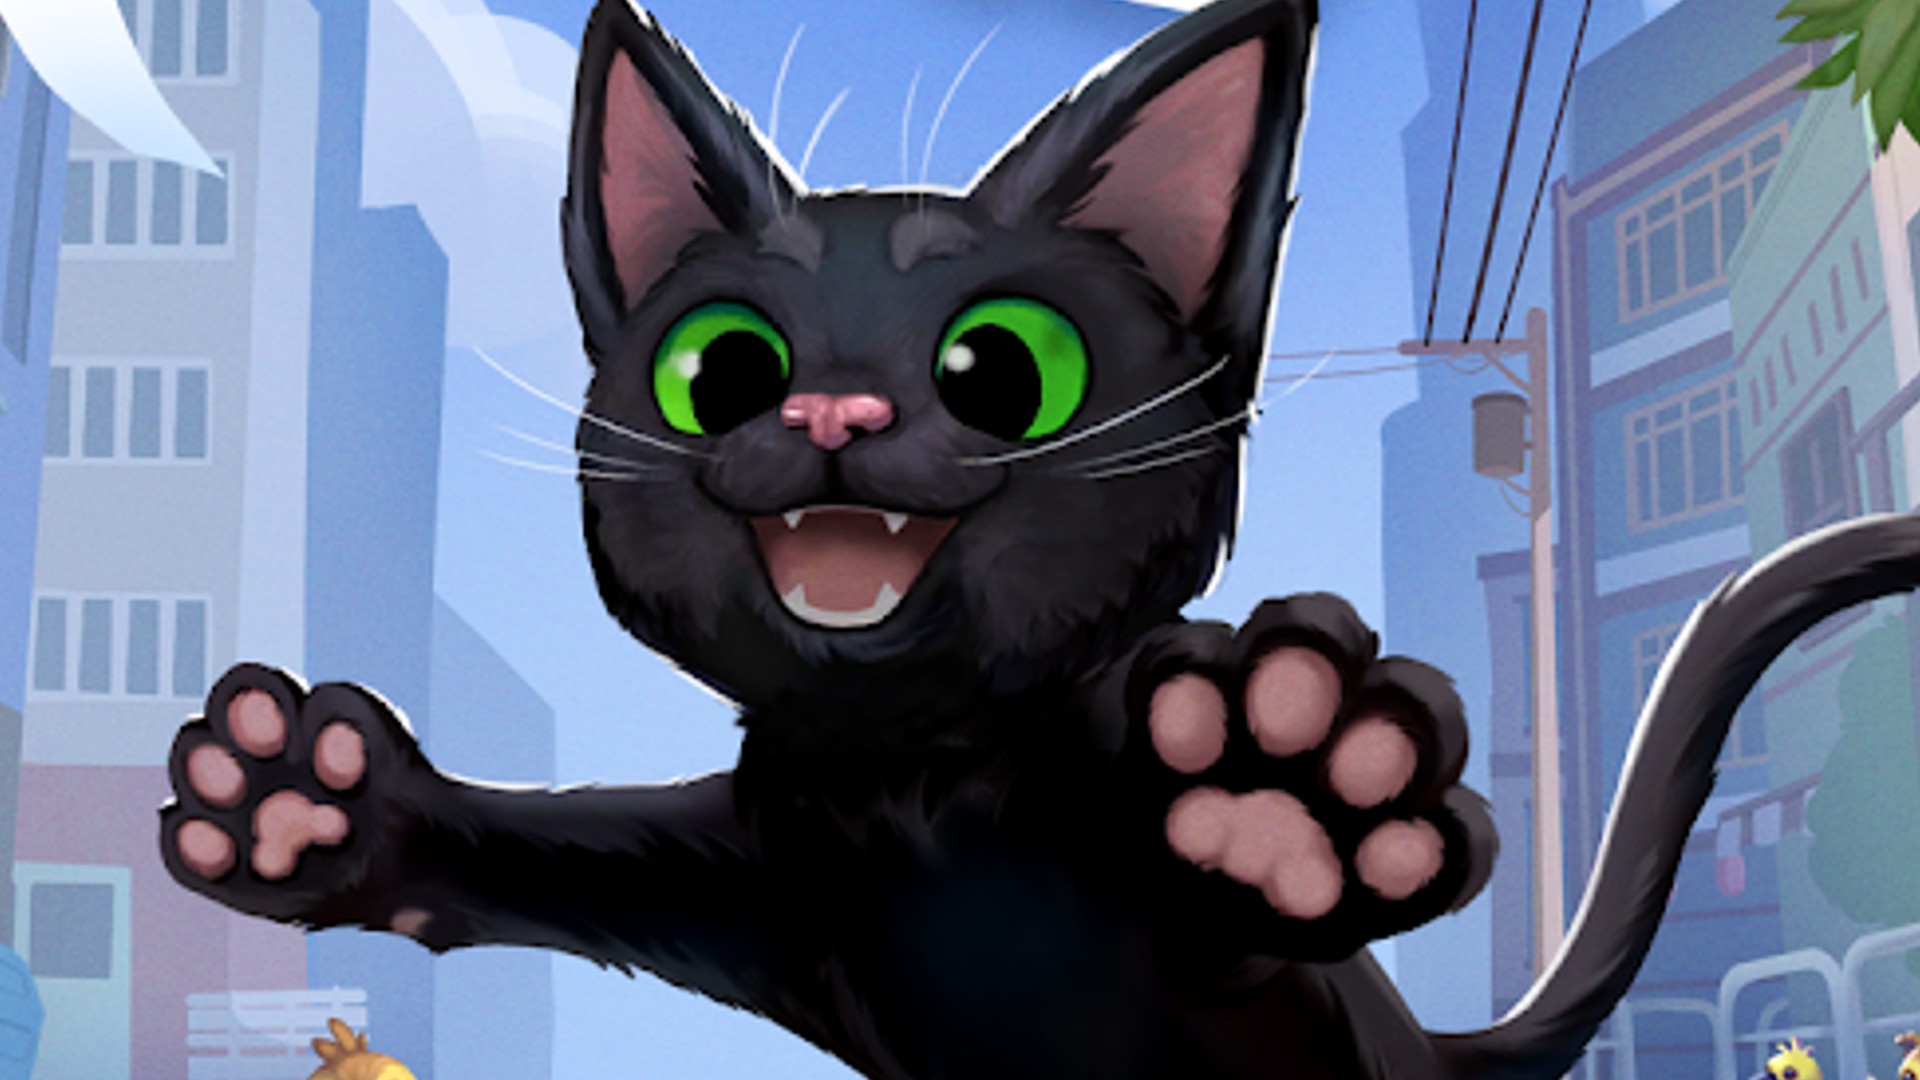 Little Kitty Big City release date, trailers, and latest news